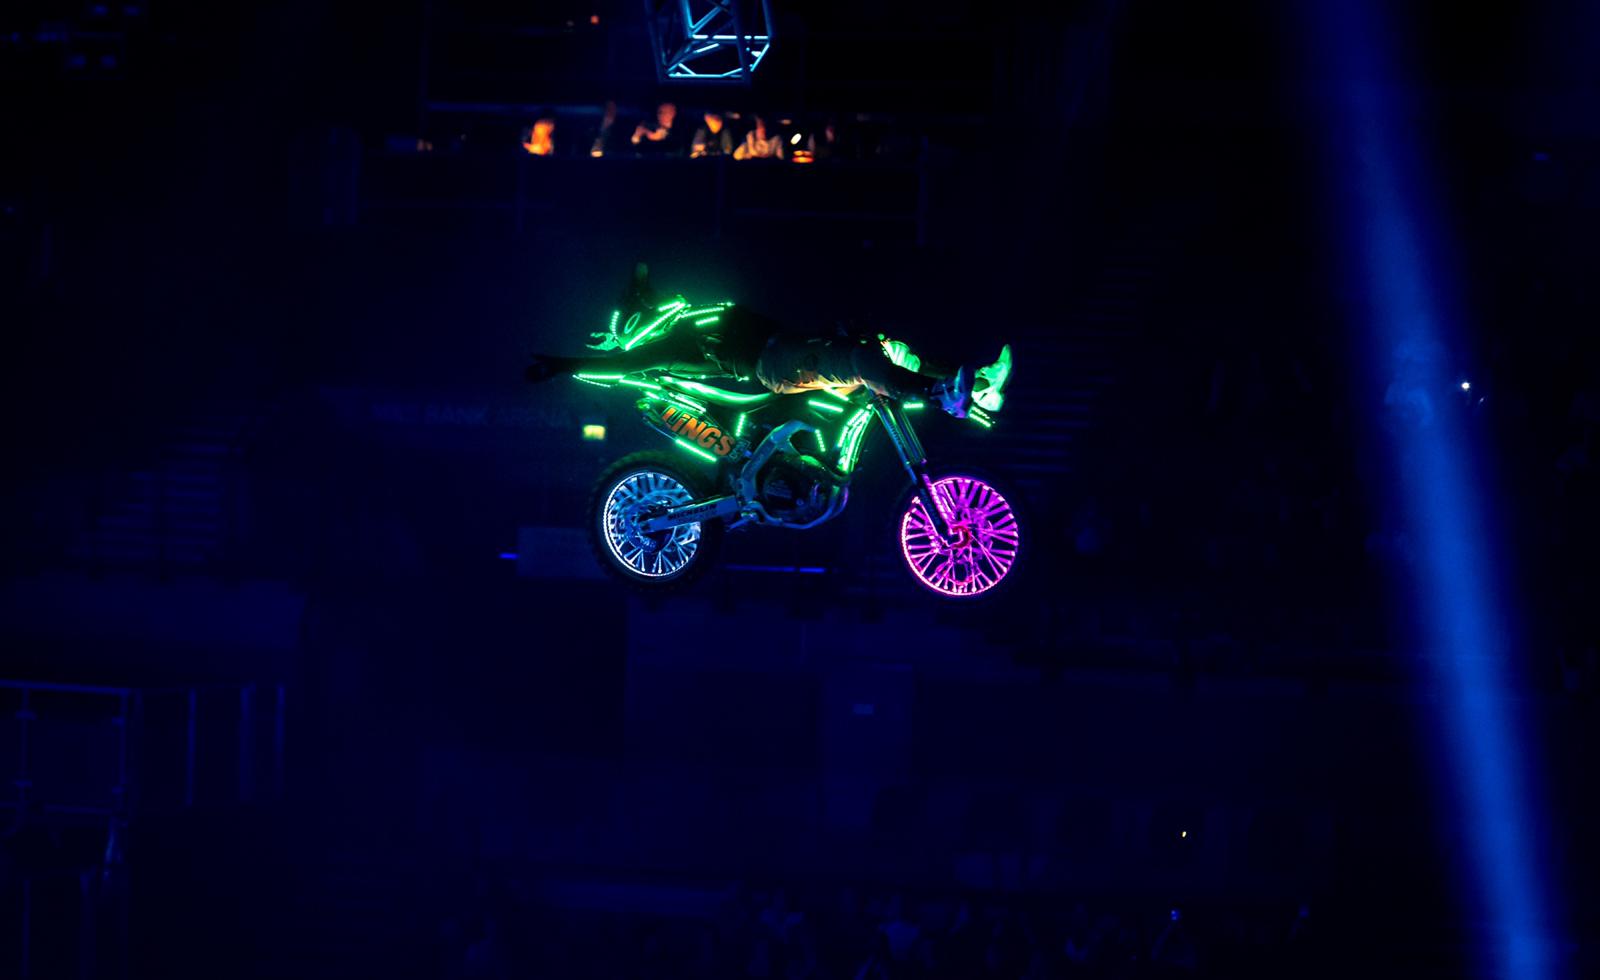 LED stunt show performers